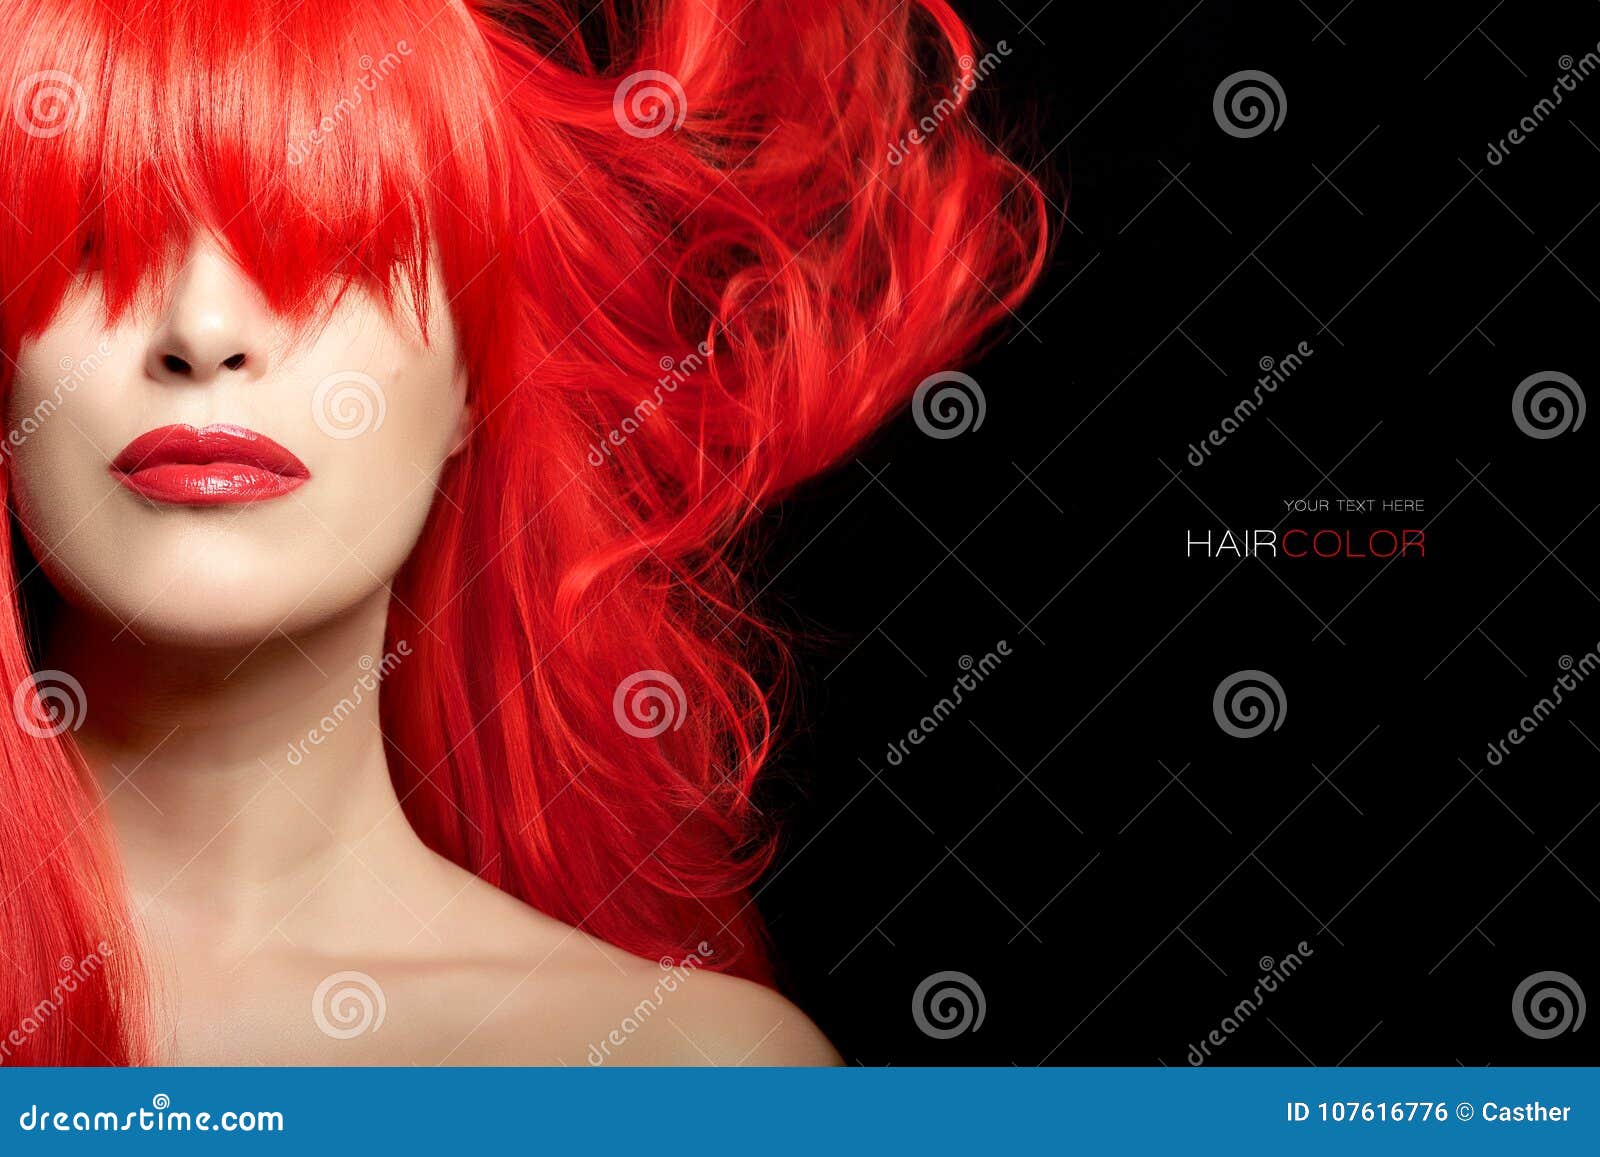 Hair color beauty concept stock photo. Image of luxury - 107616776